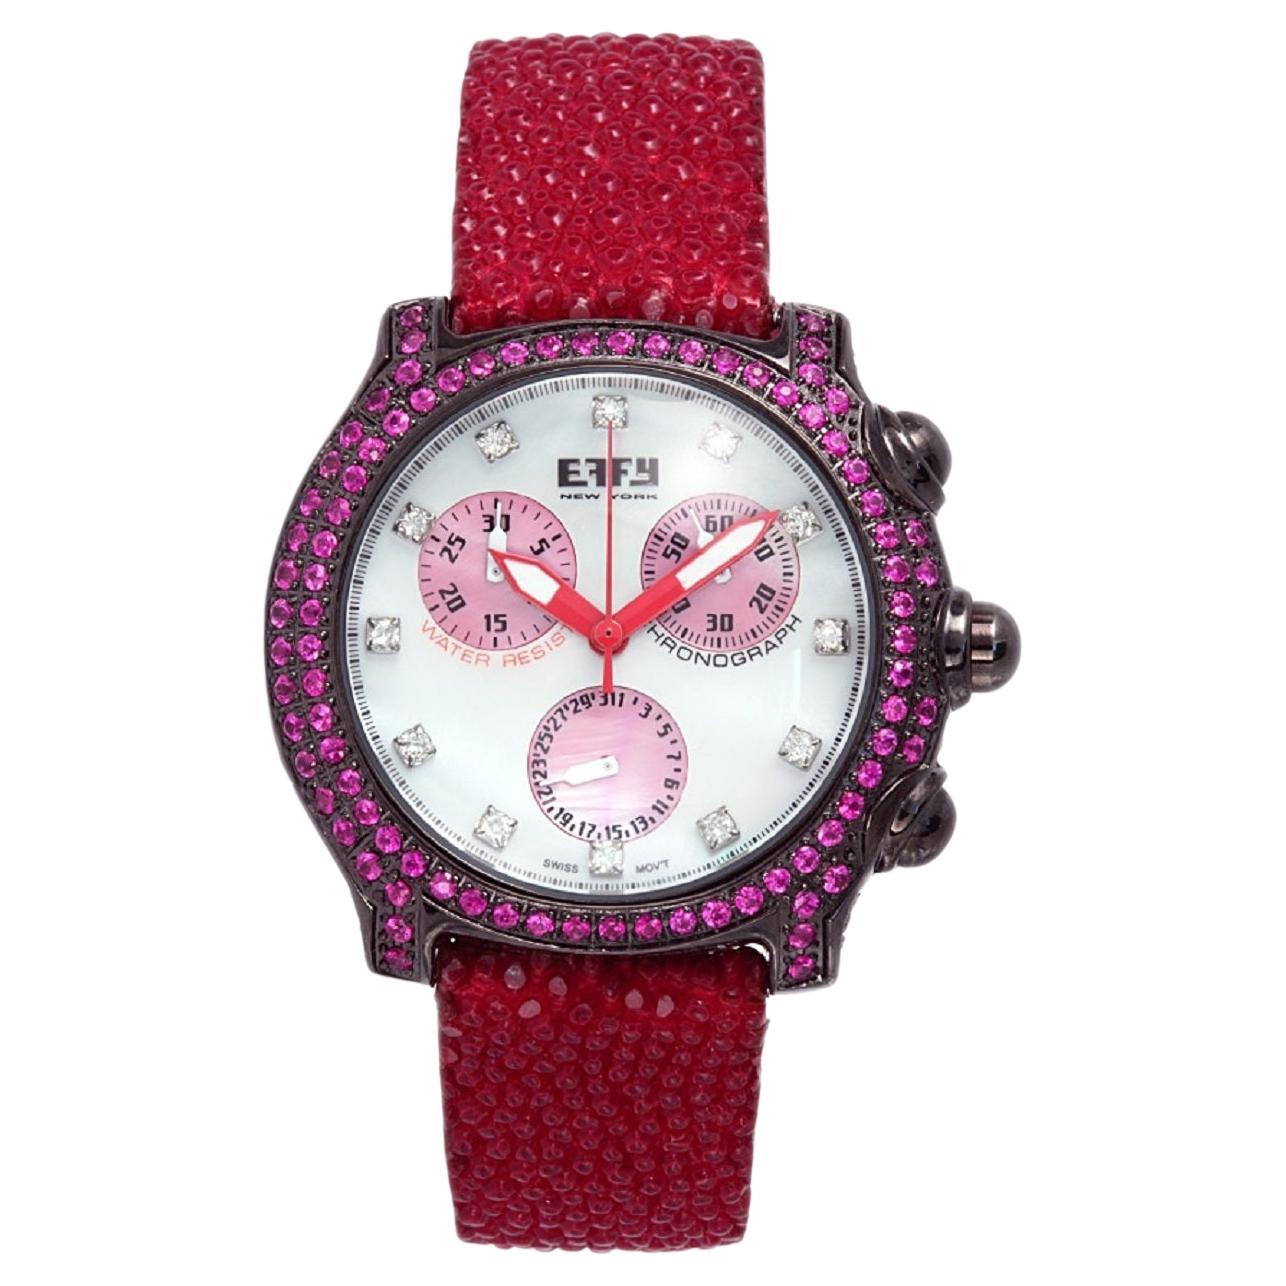 Red Sapphire & Diamond Pave Dial Luxury Swiss Quartz Exotic Leather Band Watch